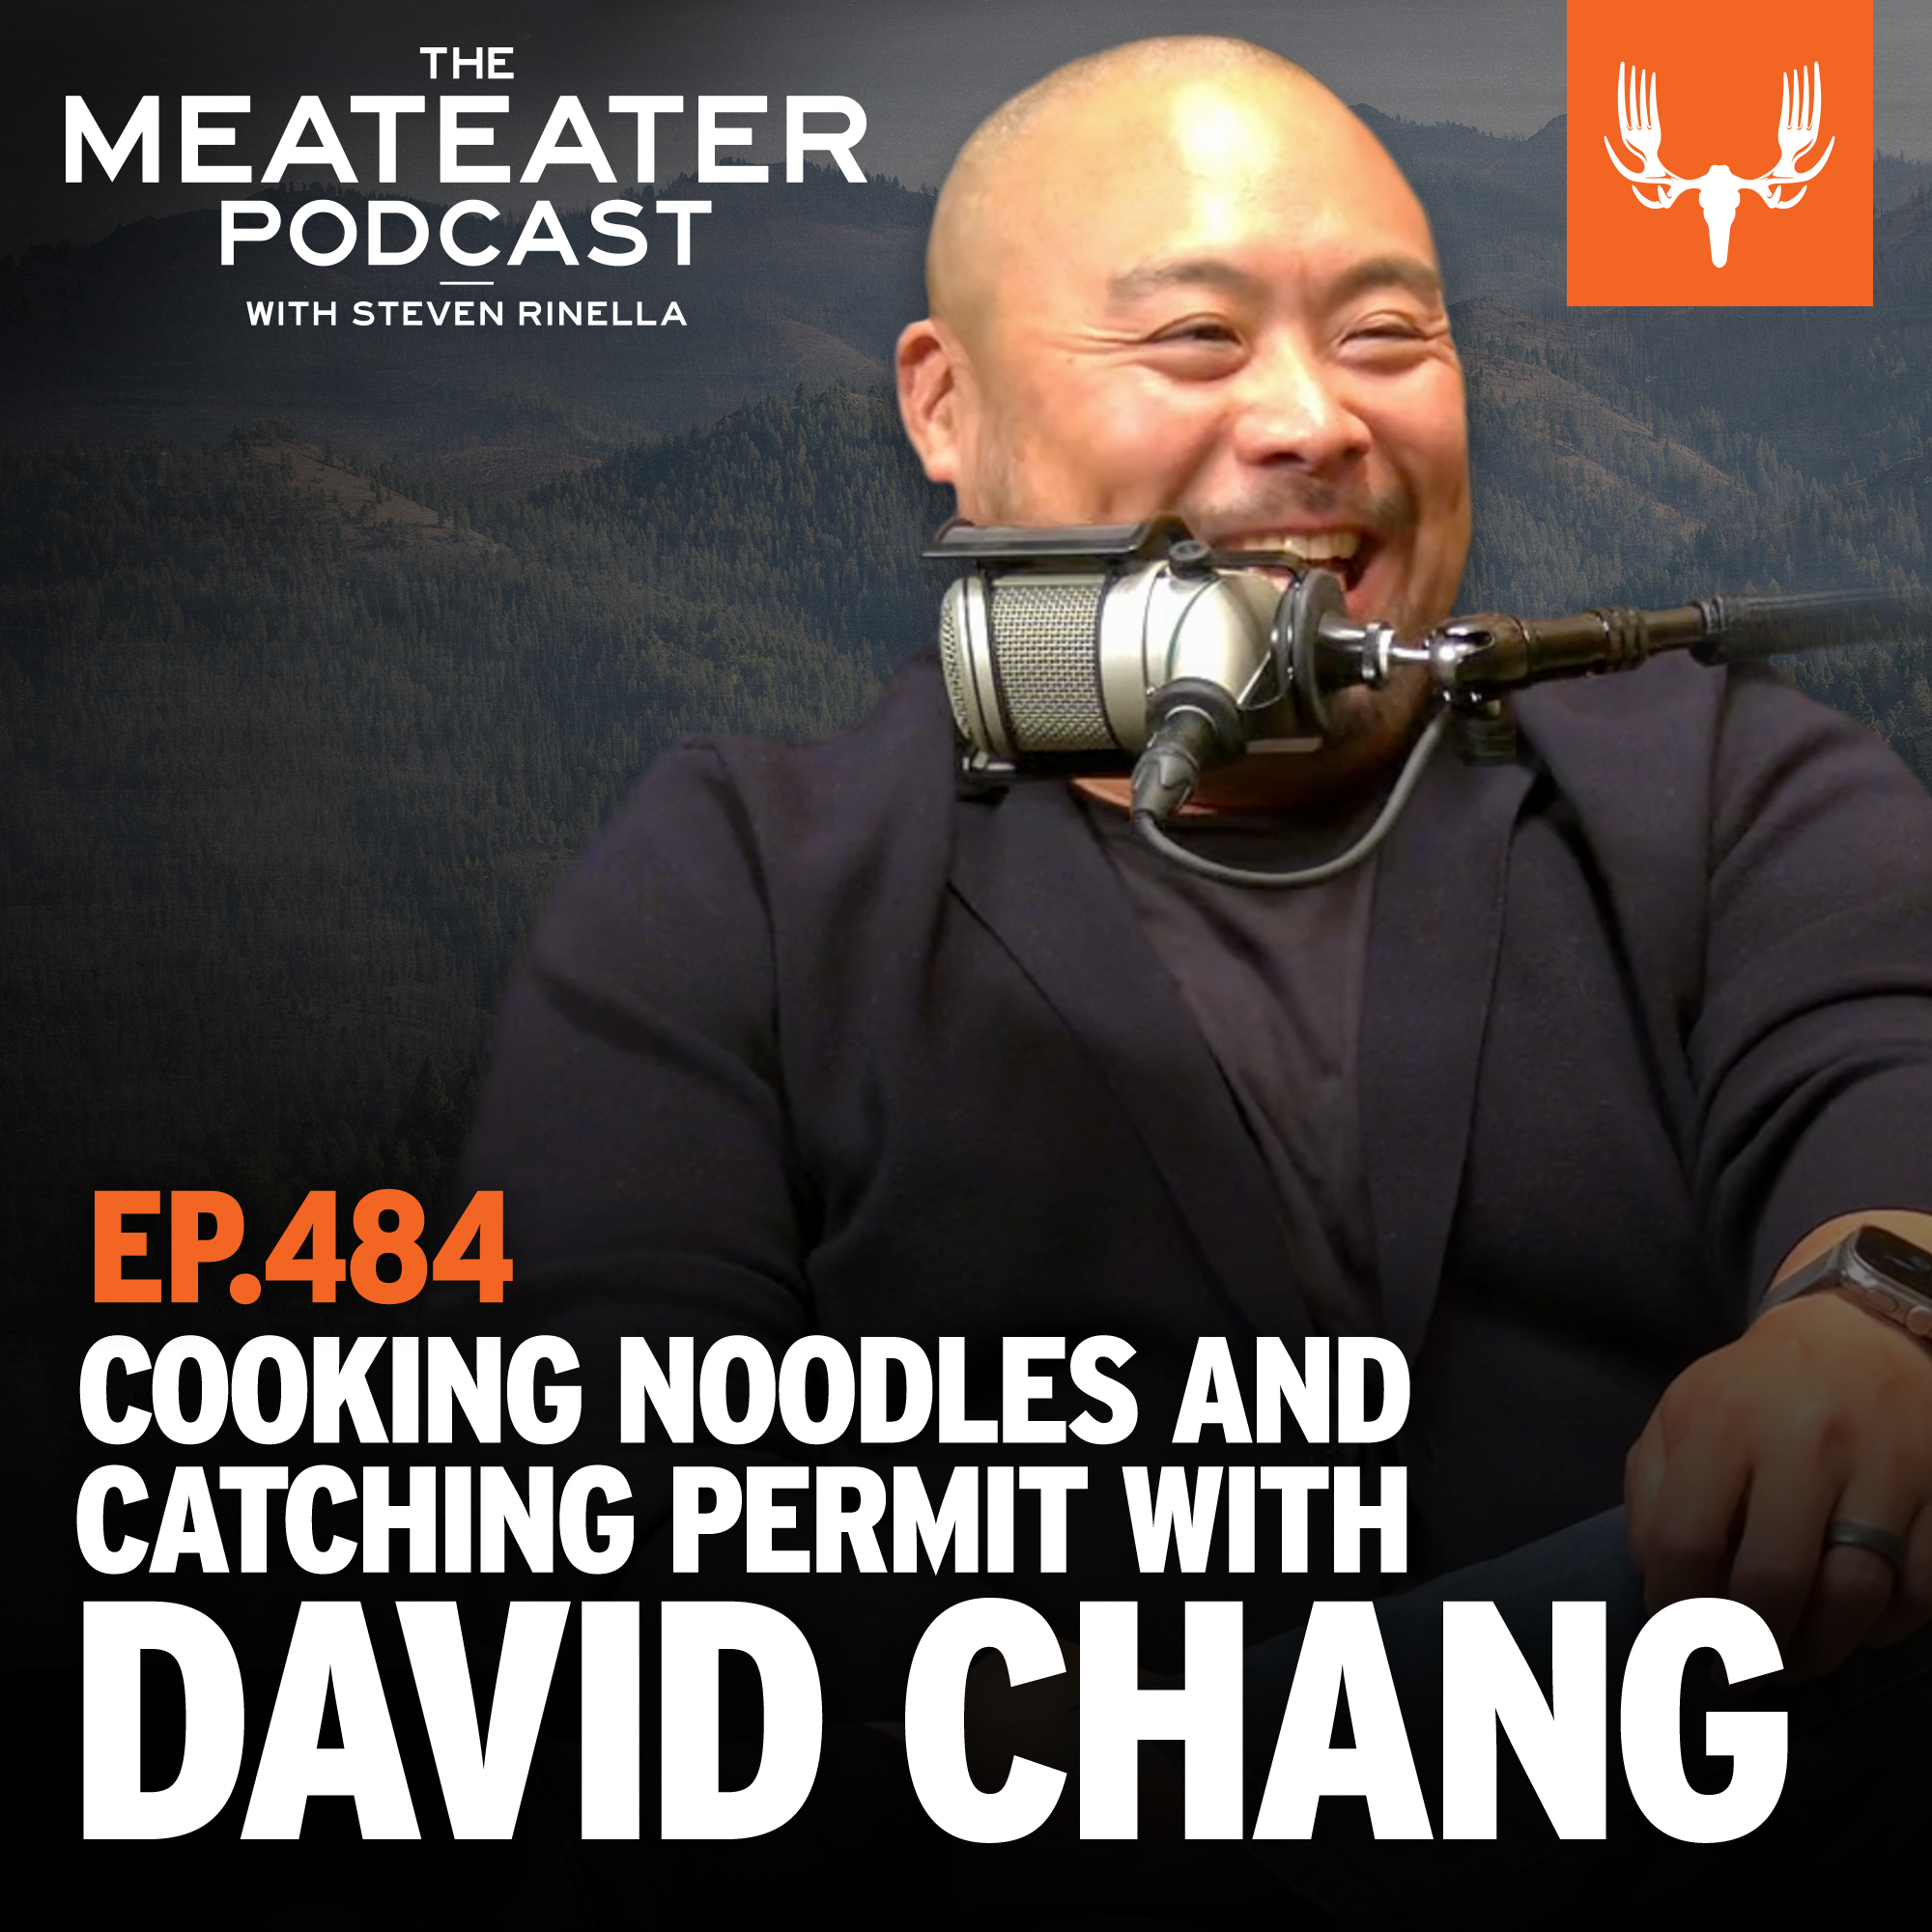 Ep. 484: Cooking Noodles and Catching Permit with David Chang